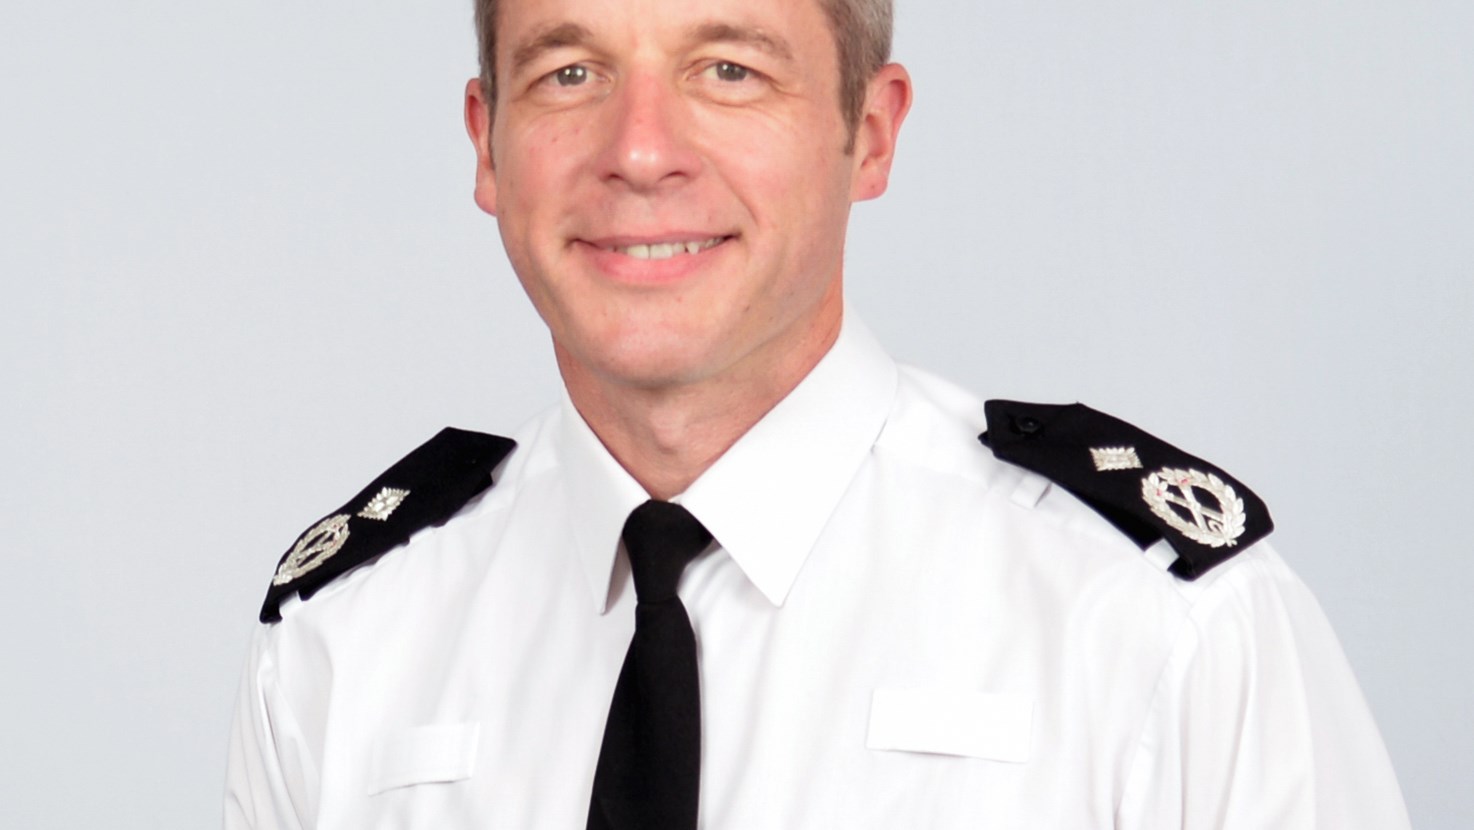 Paul Gibson confirmed as the new Chief Constable of Lincolnshire Police